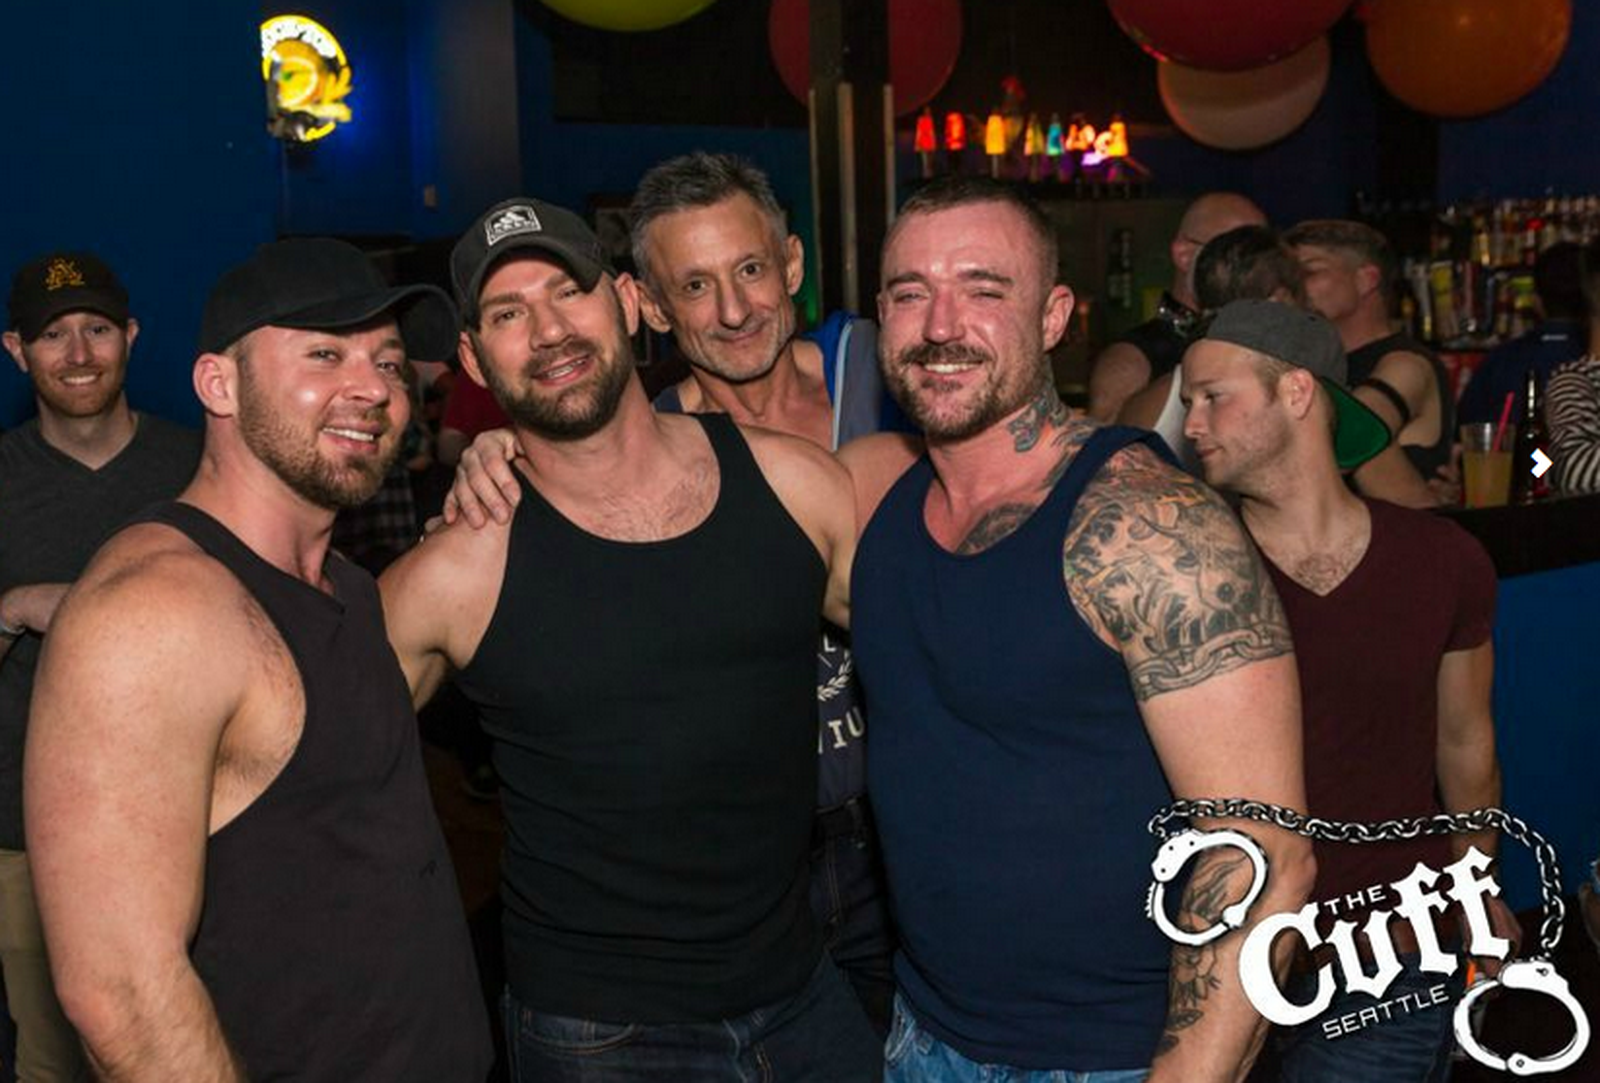 gay bars seattle closed